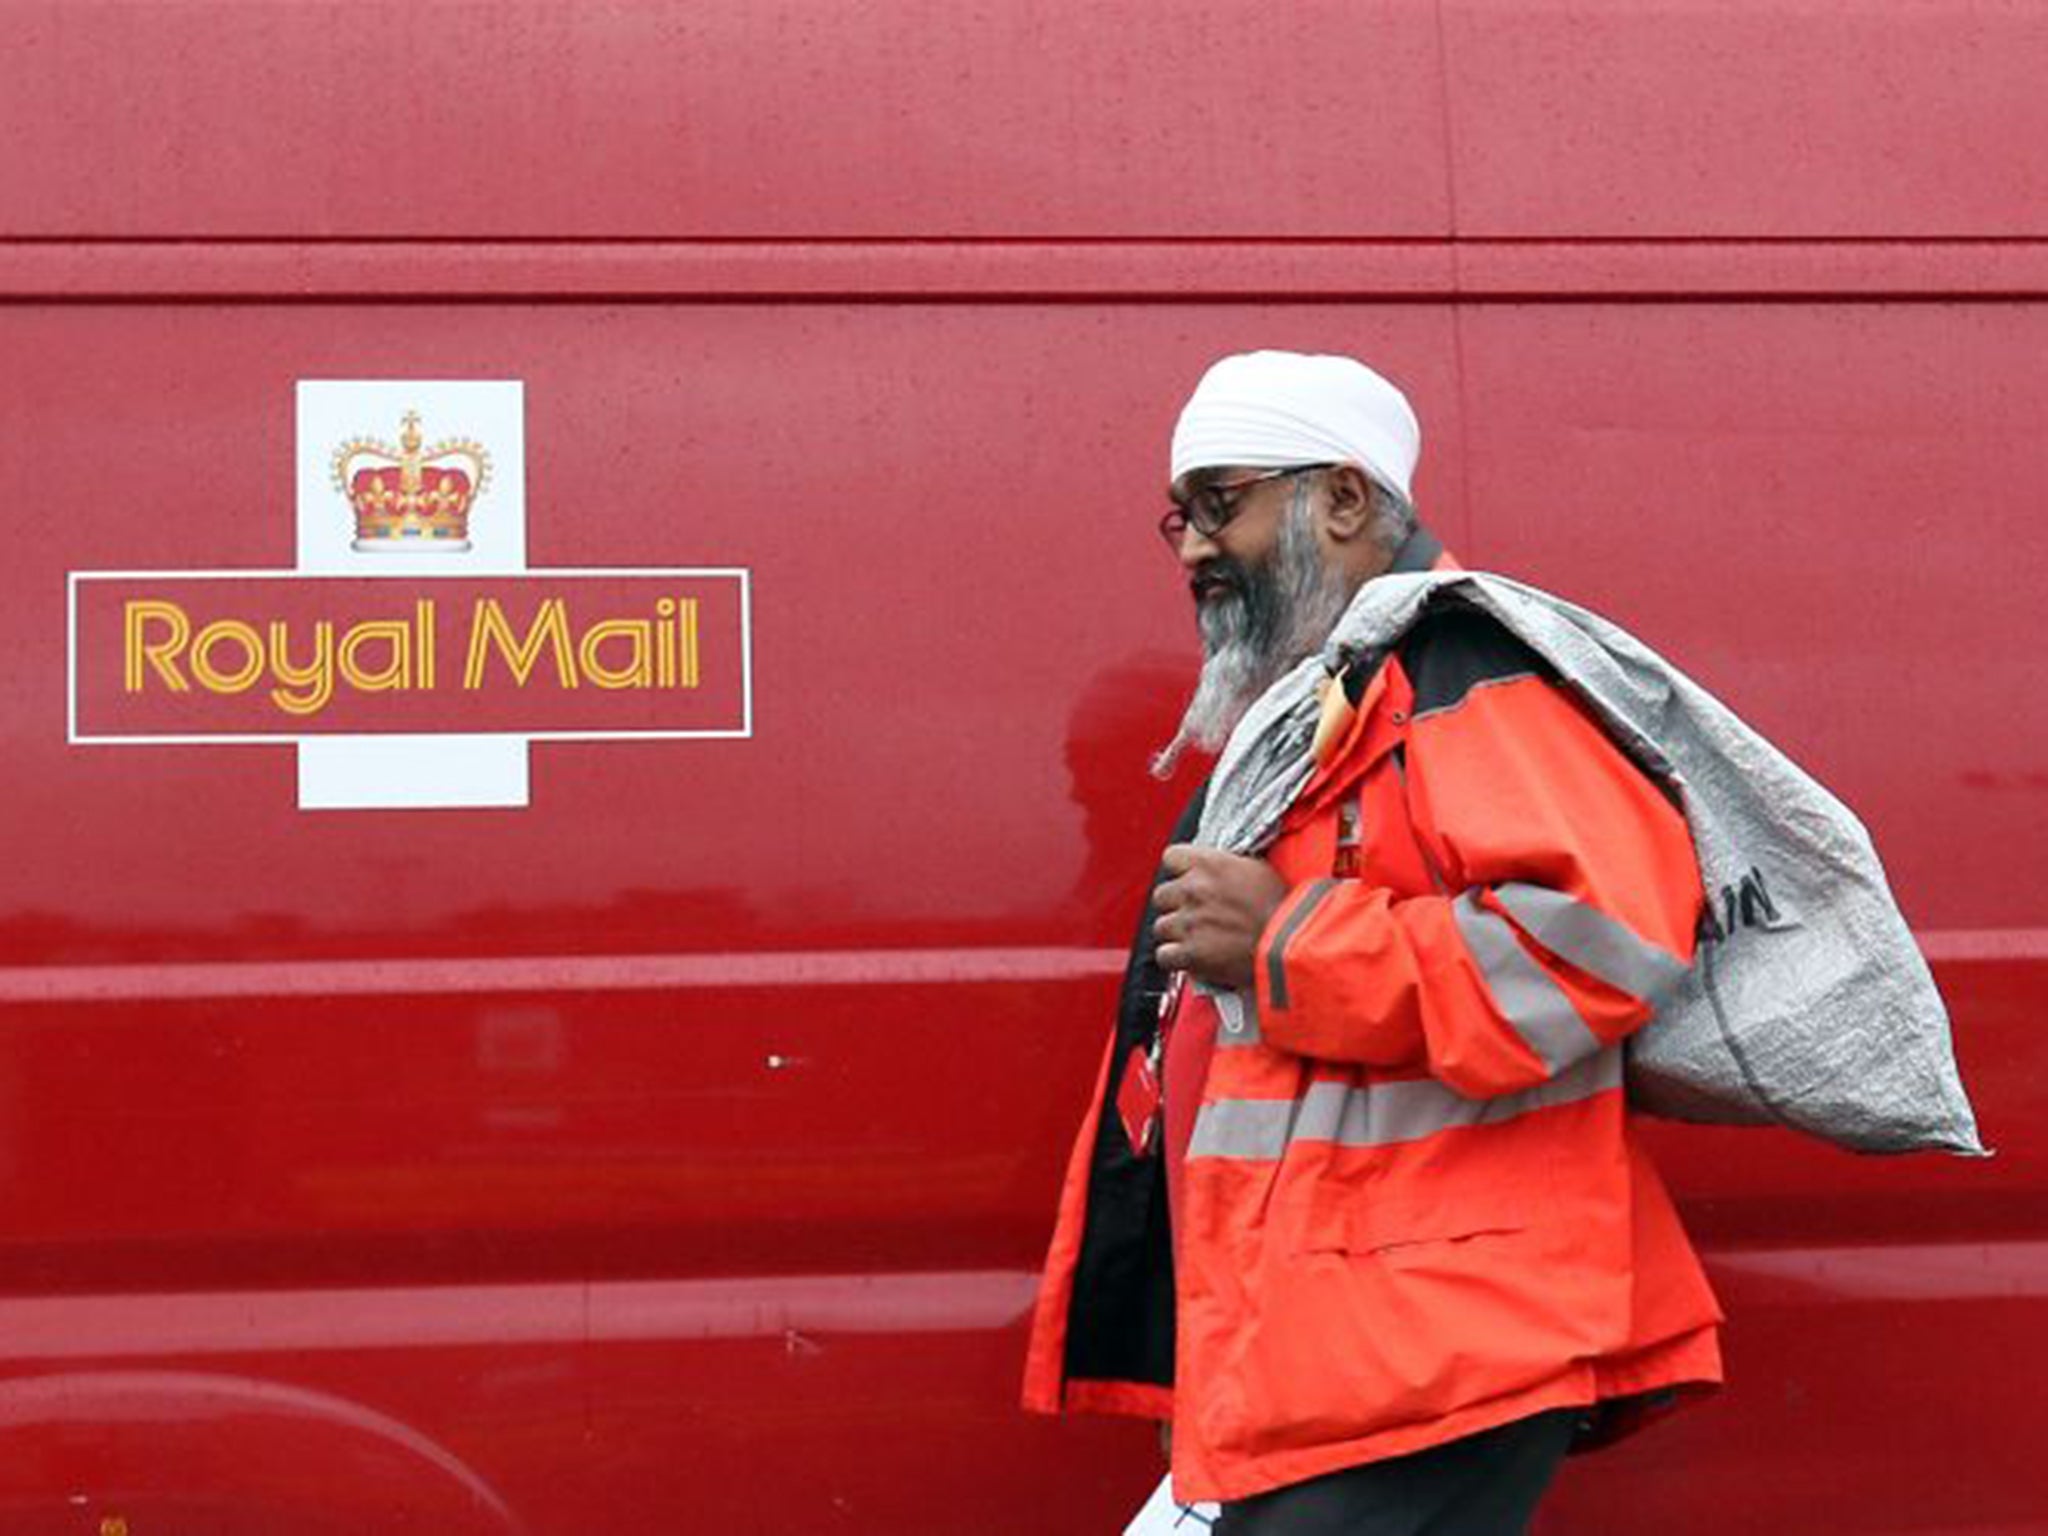 If the strike goes ahead, it will be the first time that postal workers have walked out en masse since the Royal Mail was privatised in 2015